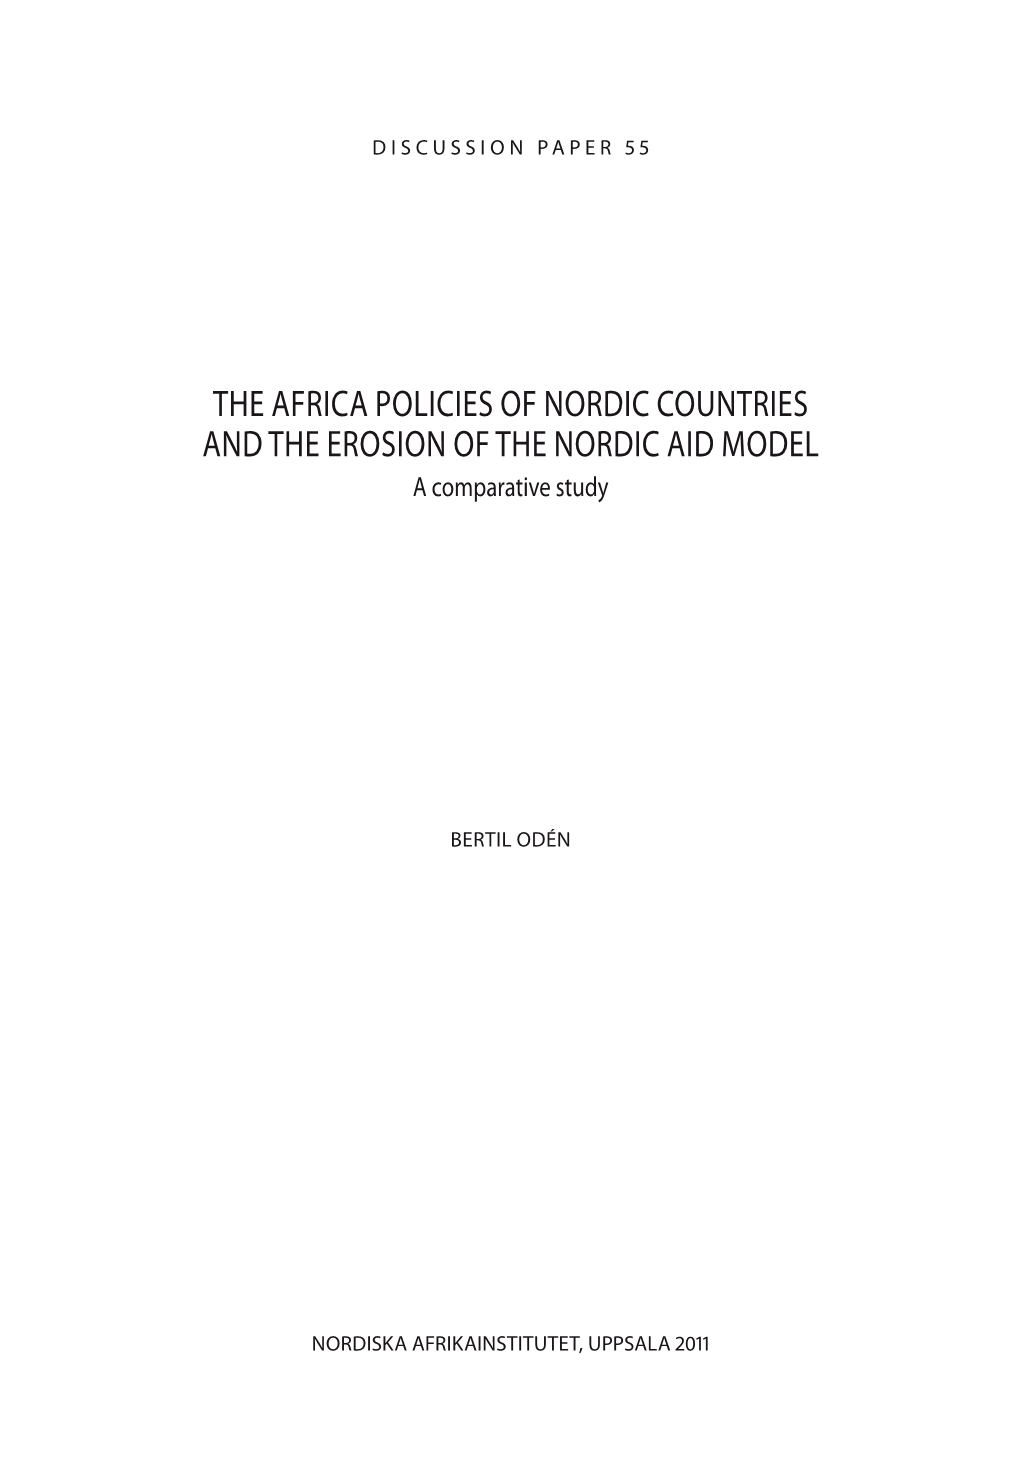 THE AFRICA POLICIES of NORDIC COUNTRIES and the EROSION of the NORDIC AID MODEL a Comparative Study